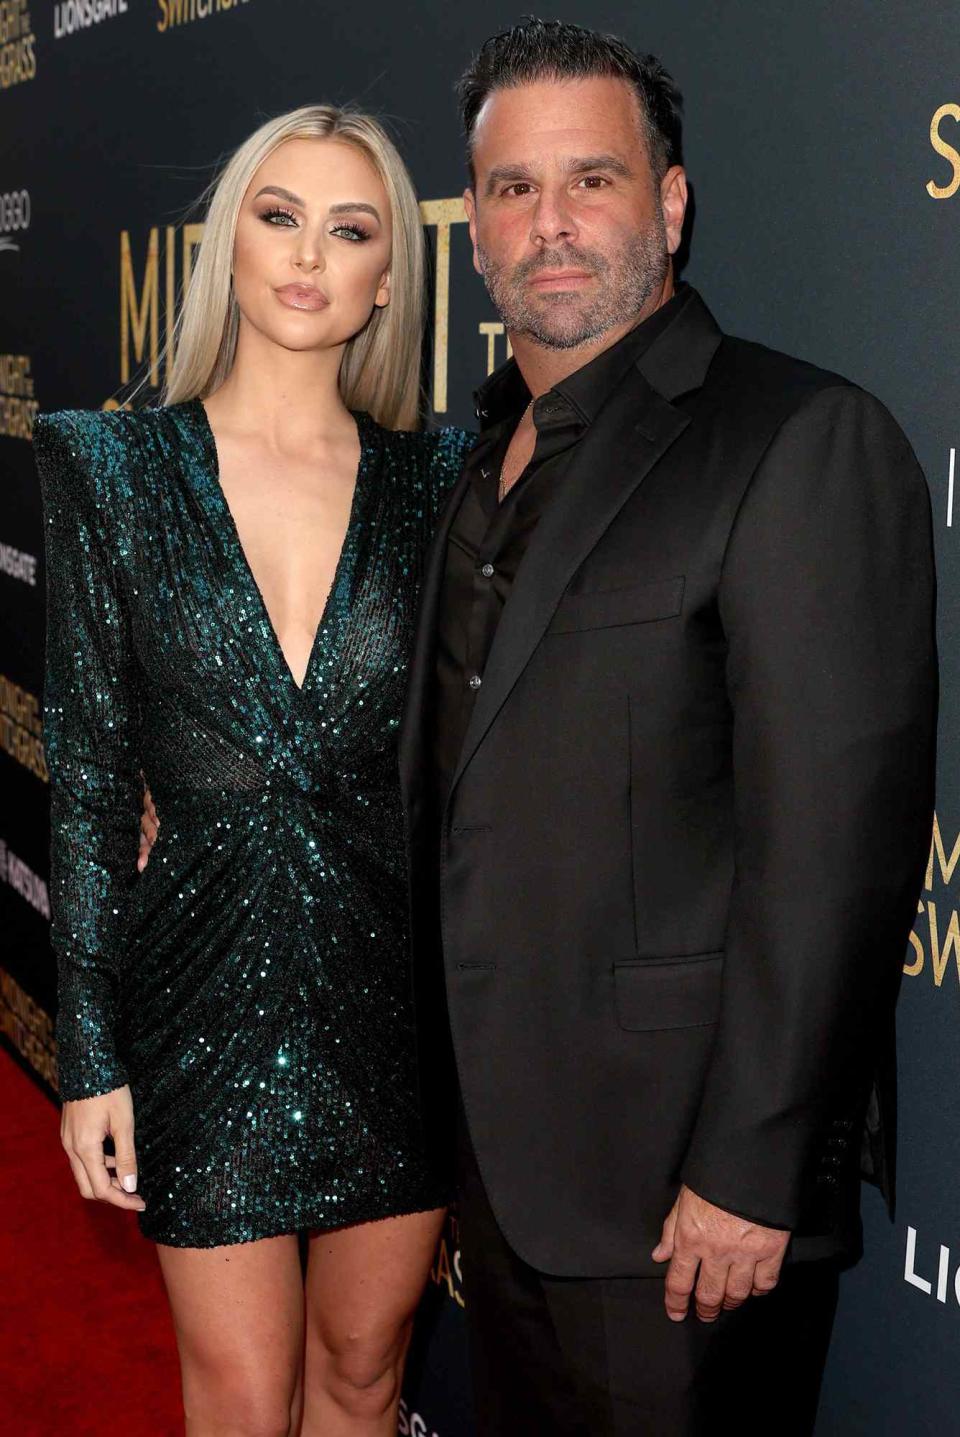 Lala Kent and Randall Emmett attend the Los Angeles special screening of Lionsgate's "Midnight in the Switchgrass" at Regal LA Live on July 19, 2021 in Los Angeles, California